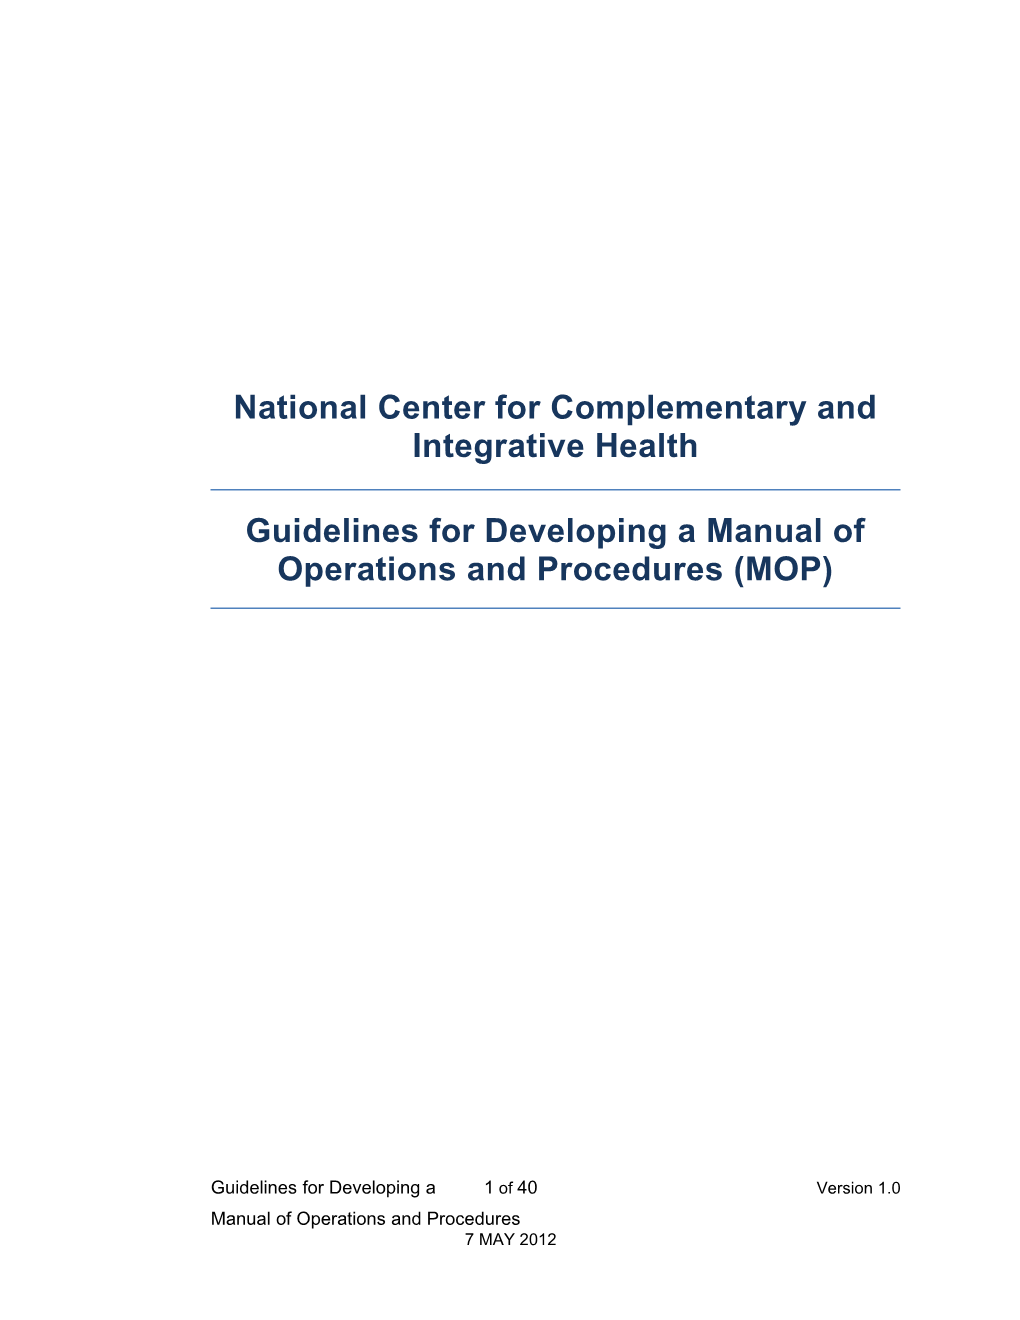 Guidelines For Developing A Manual Of Operations And Procedures (MOP)